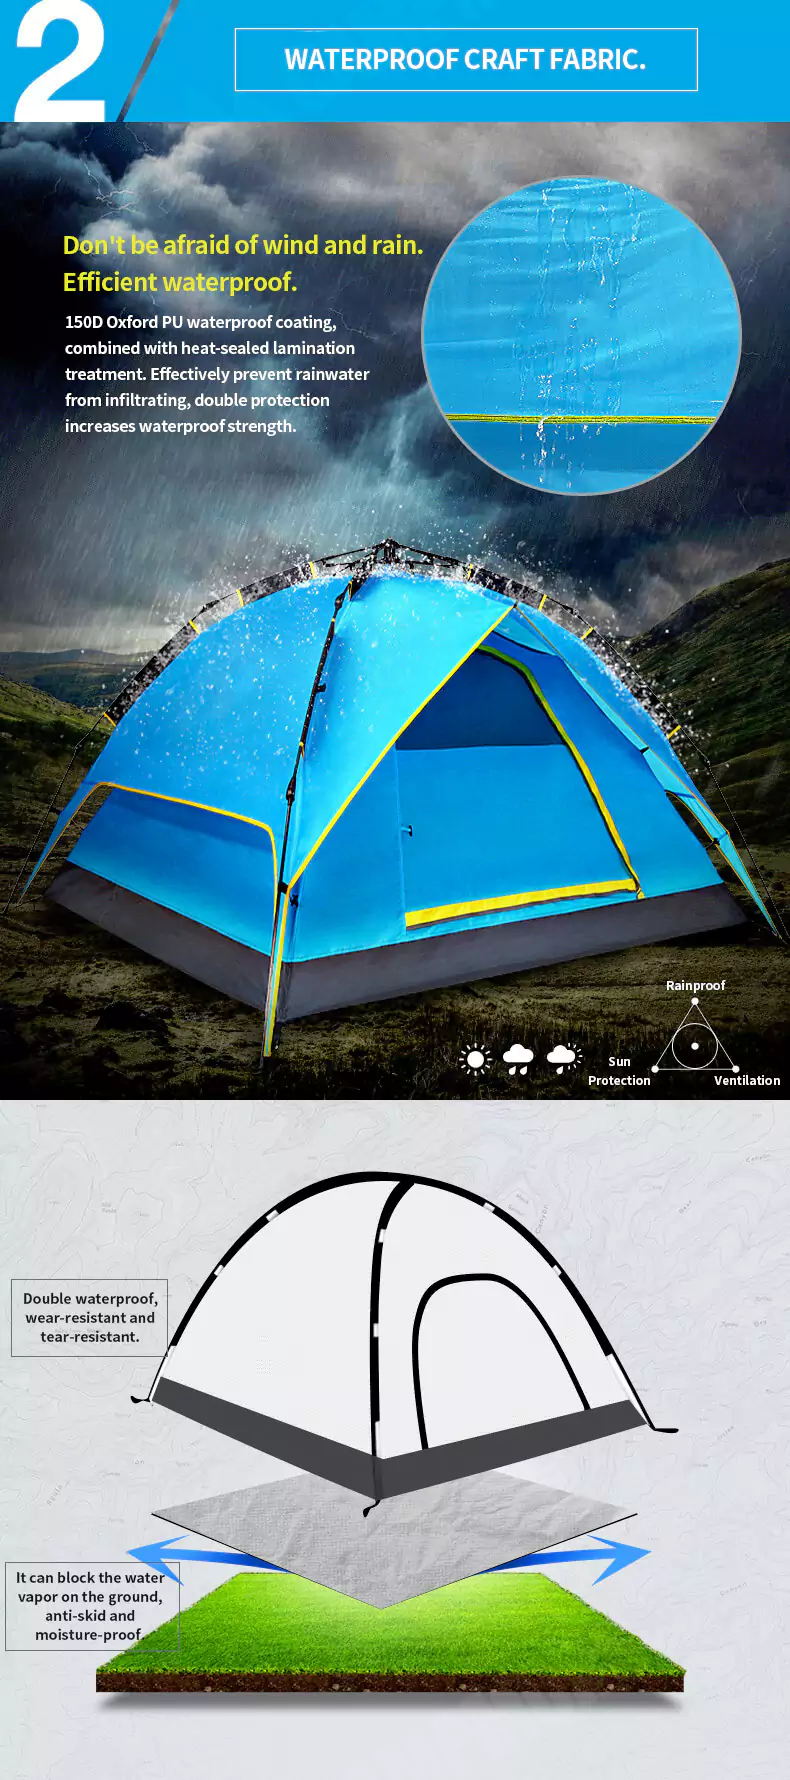 Backpacking Tents23 04